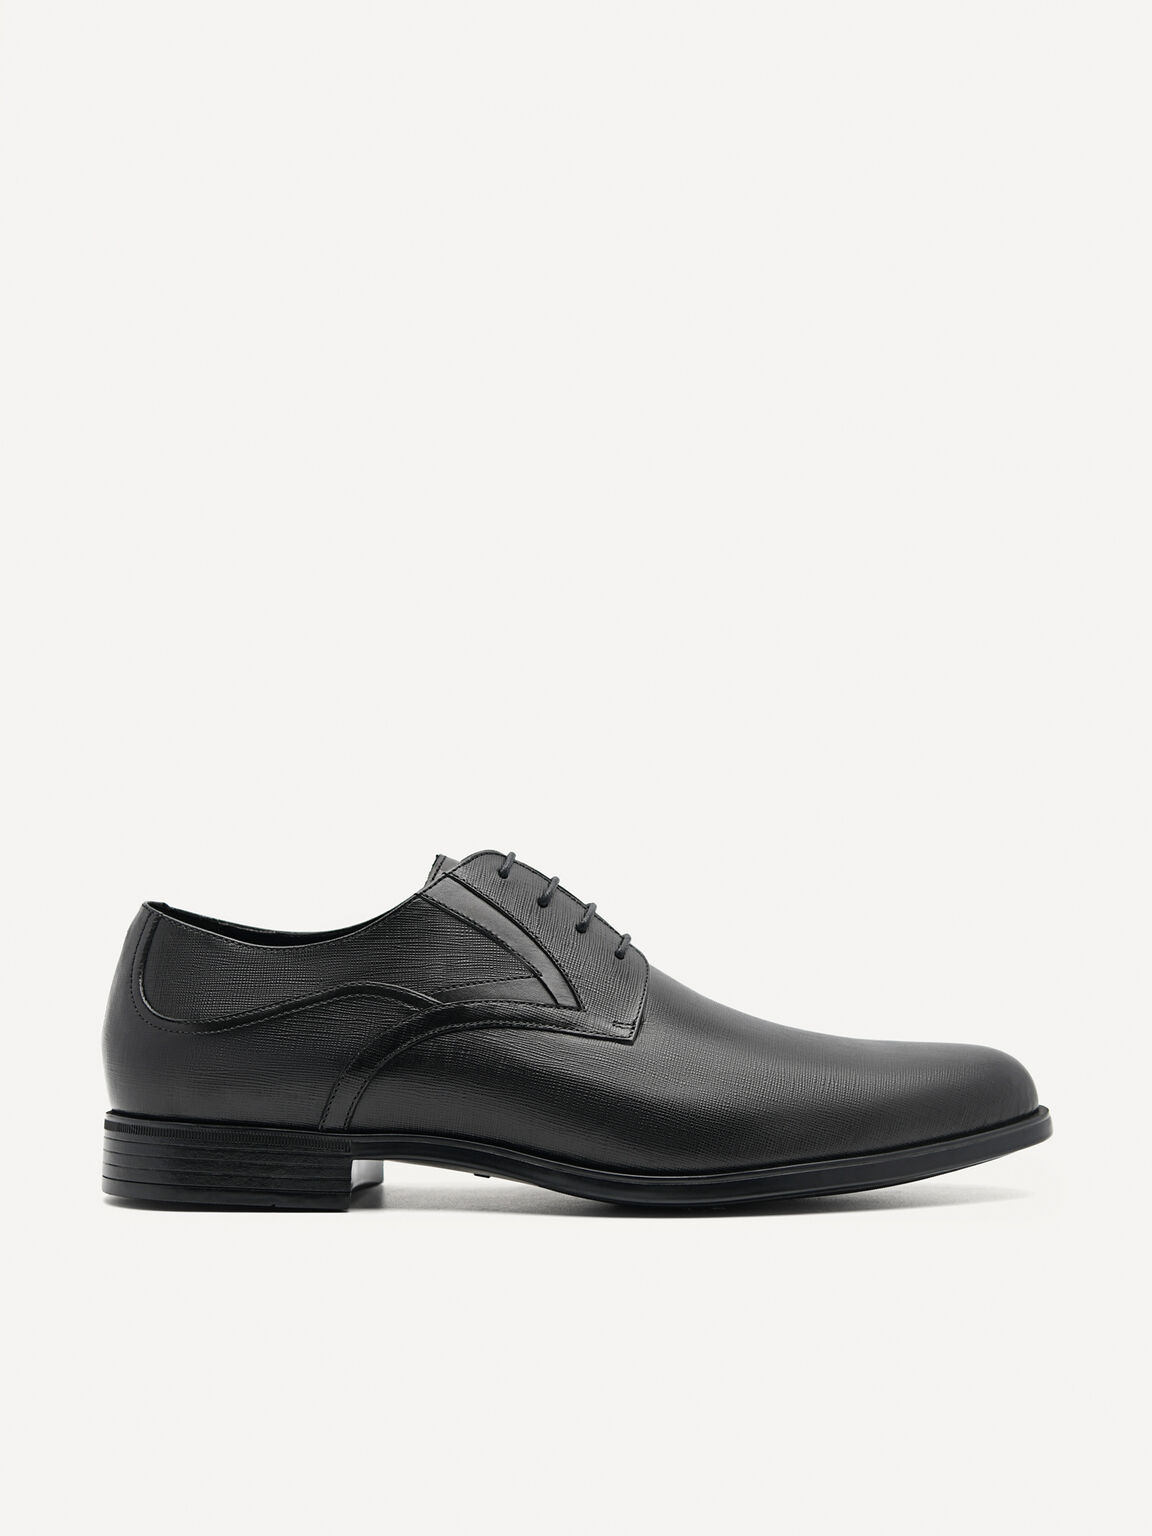 Ford Leather Derby Shoes, Black